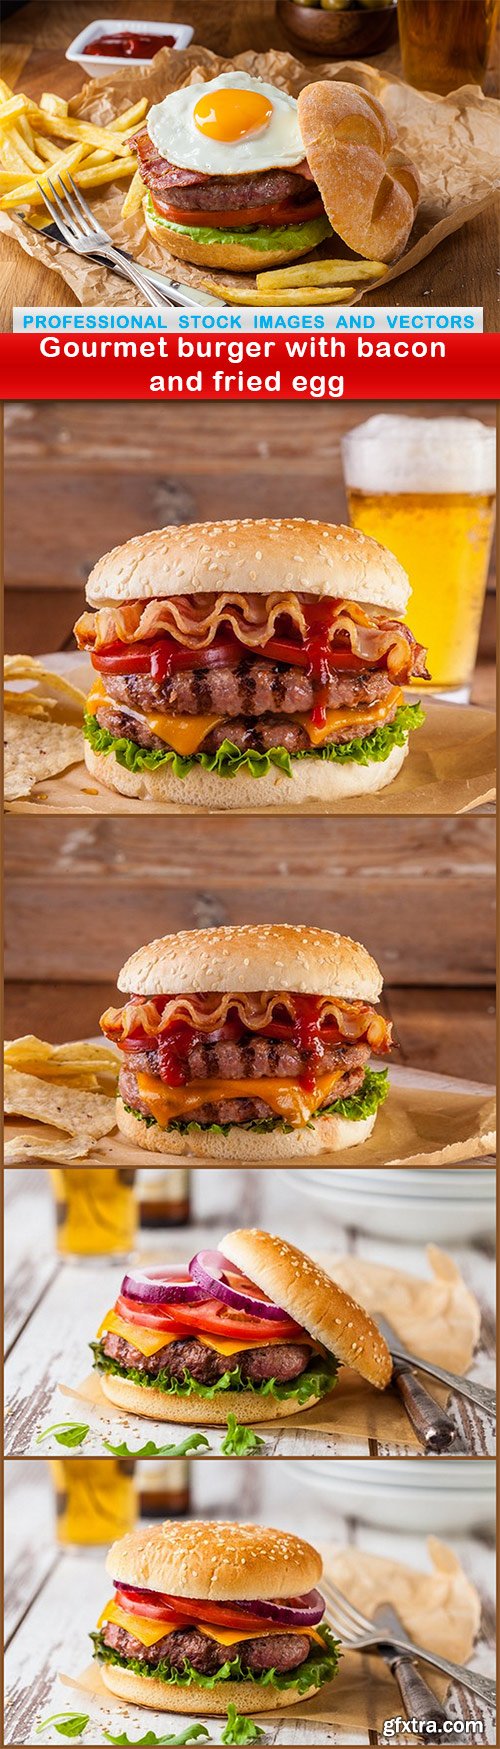 Gourmet burger with bacon and fried egg - 5 UHQ JPEG